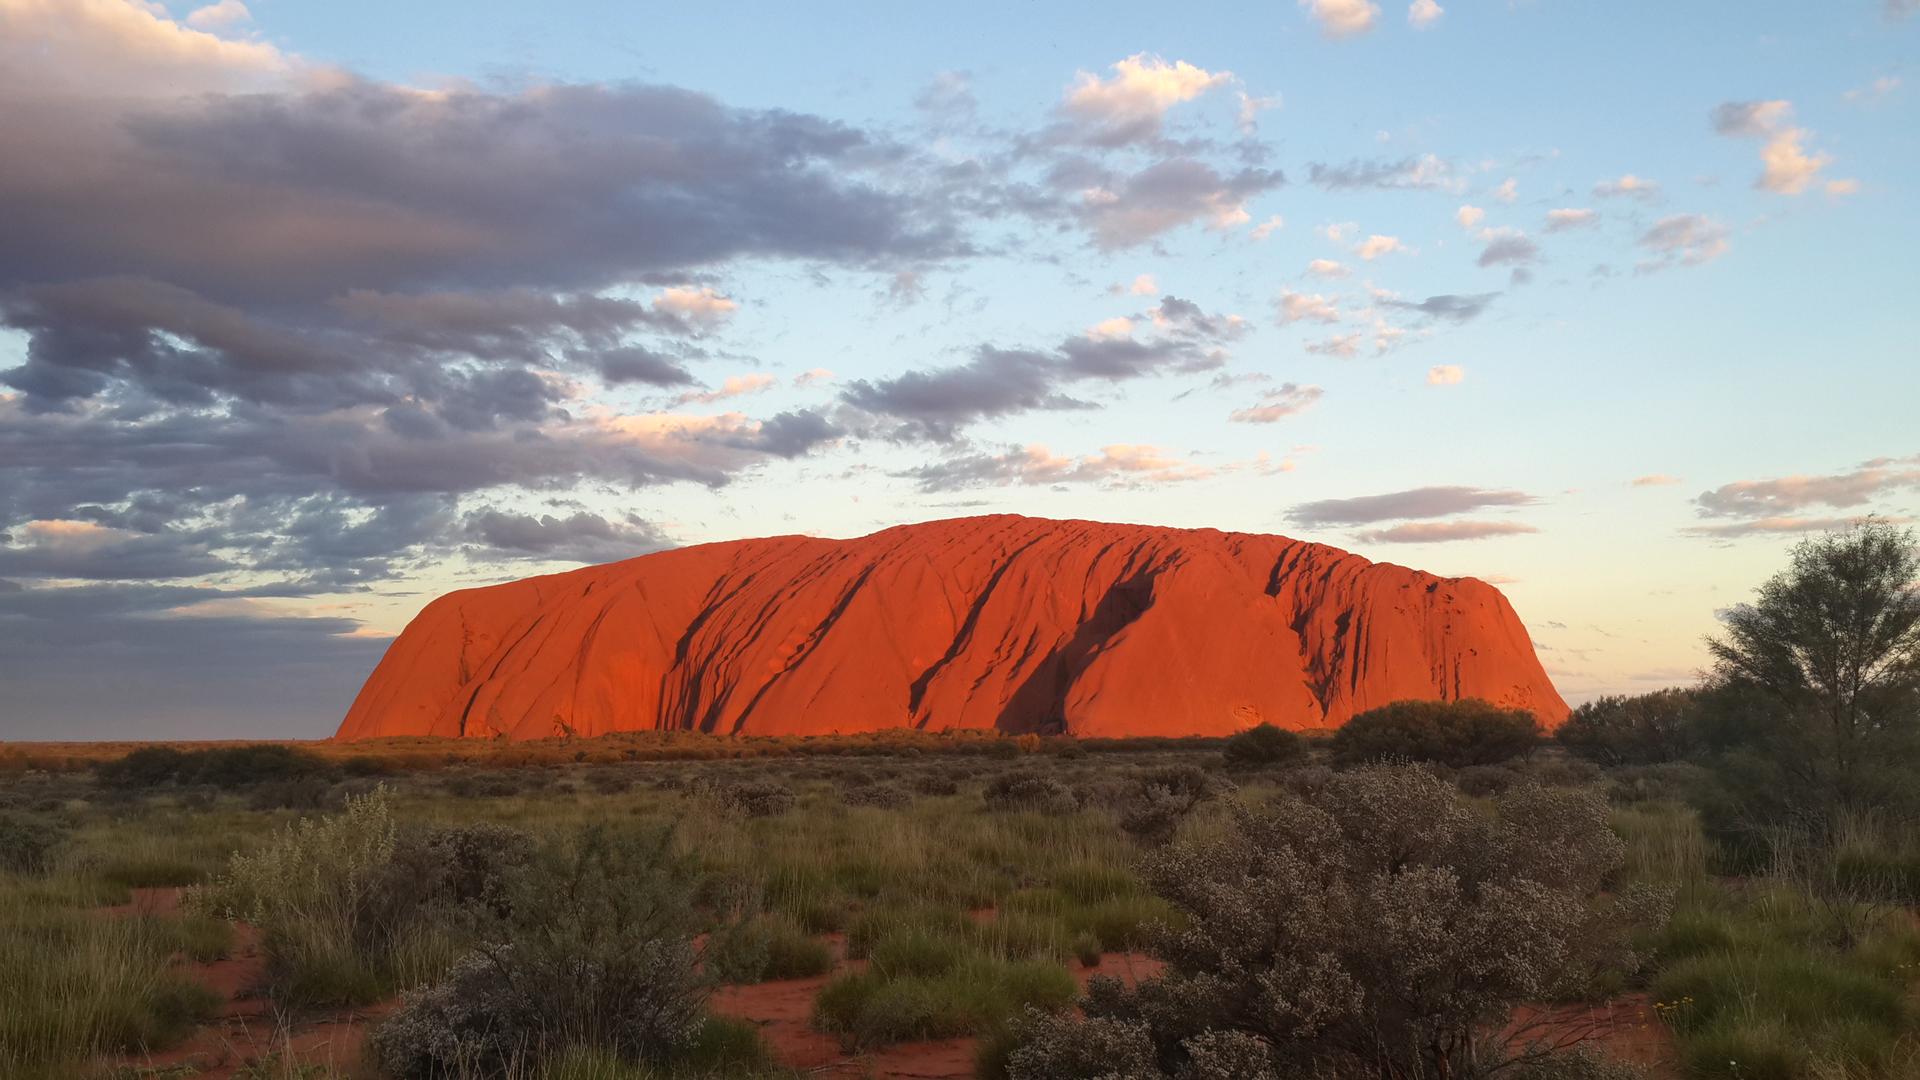 The height of the Uluru is almost comparable to Empire State Building while the width equals to 30 longer edges of a soccer field. We had to drive 5 more kilometers from the place where took this picture to get to the rock.